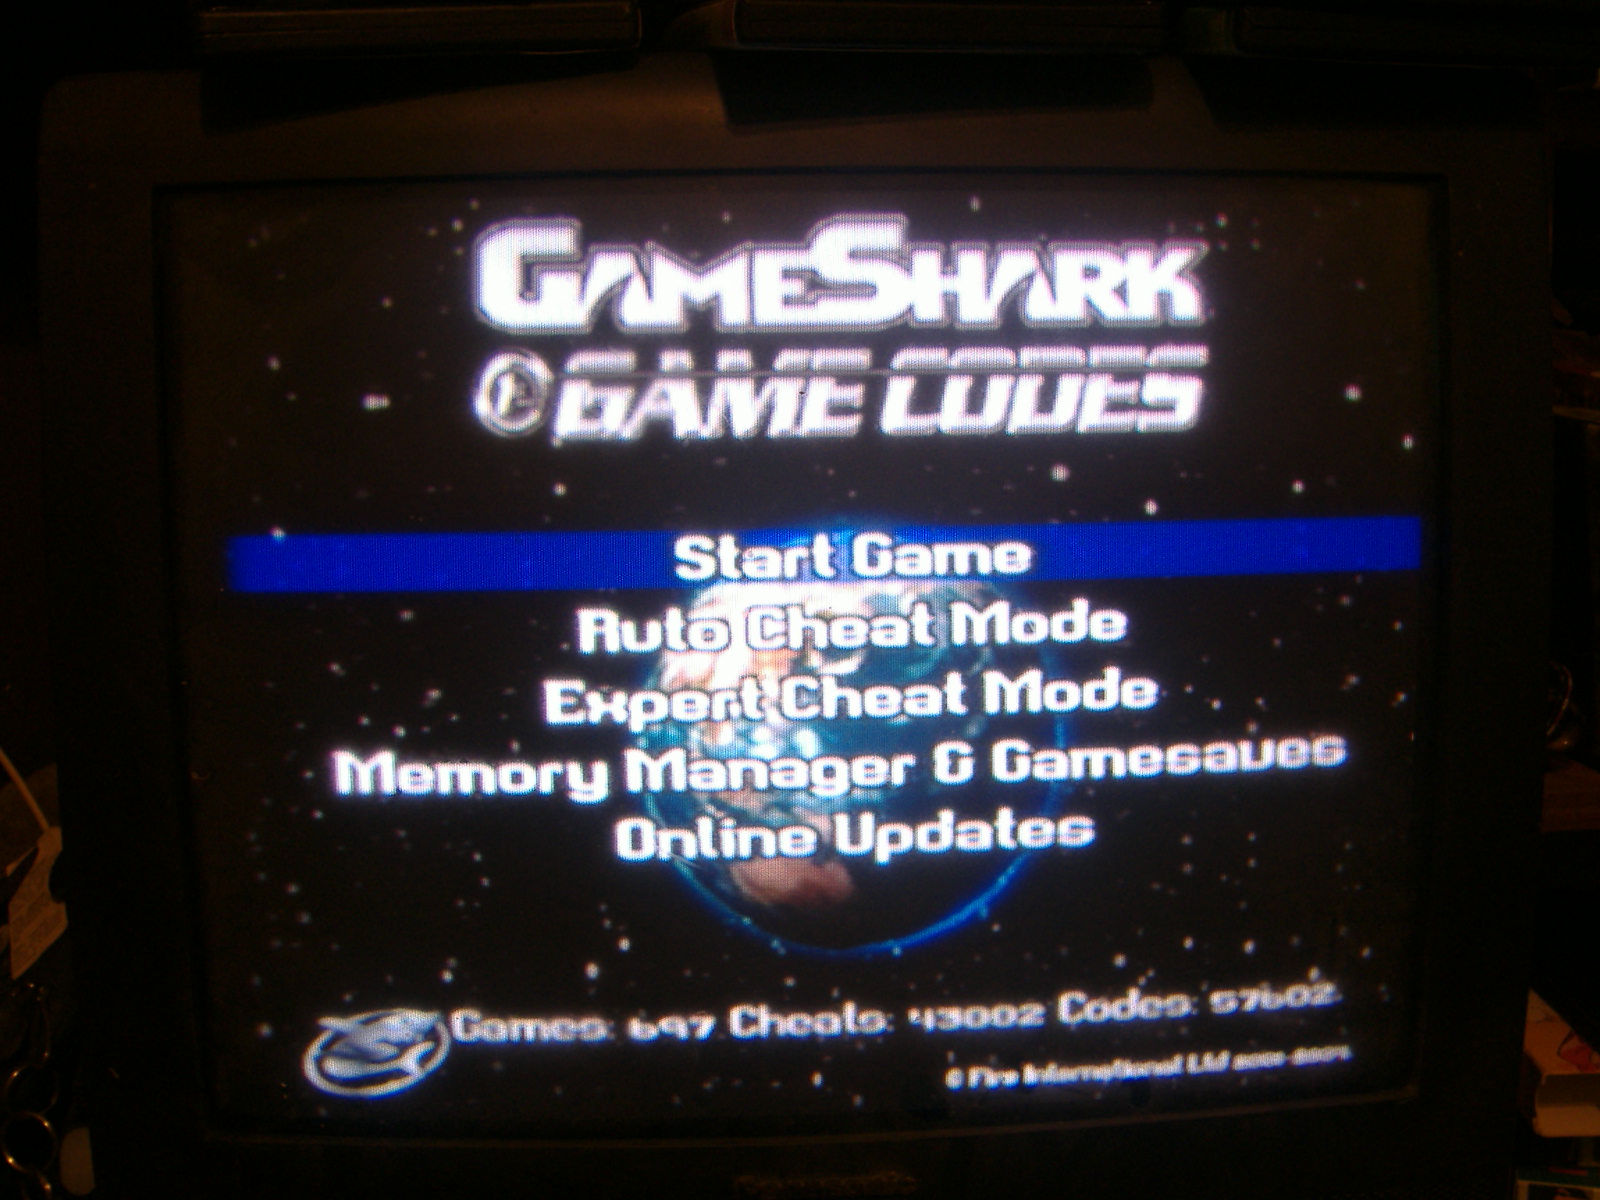 how to use gameshark for ps2 